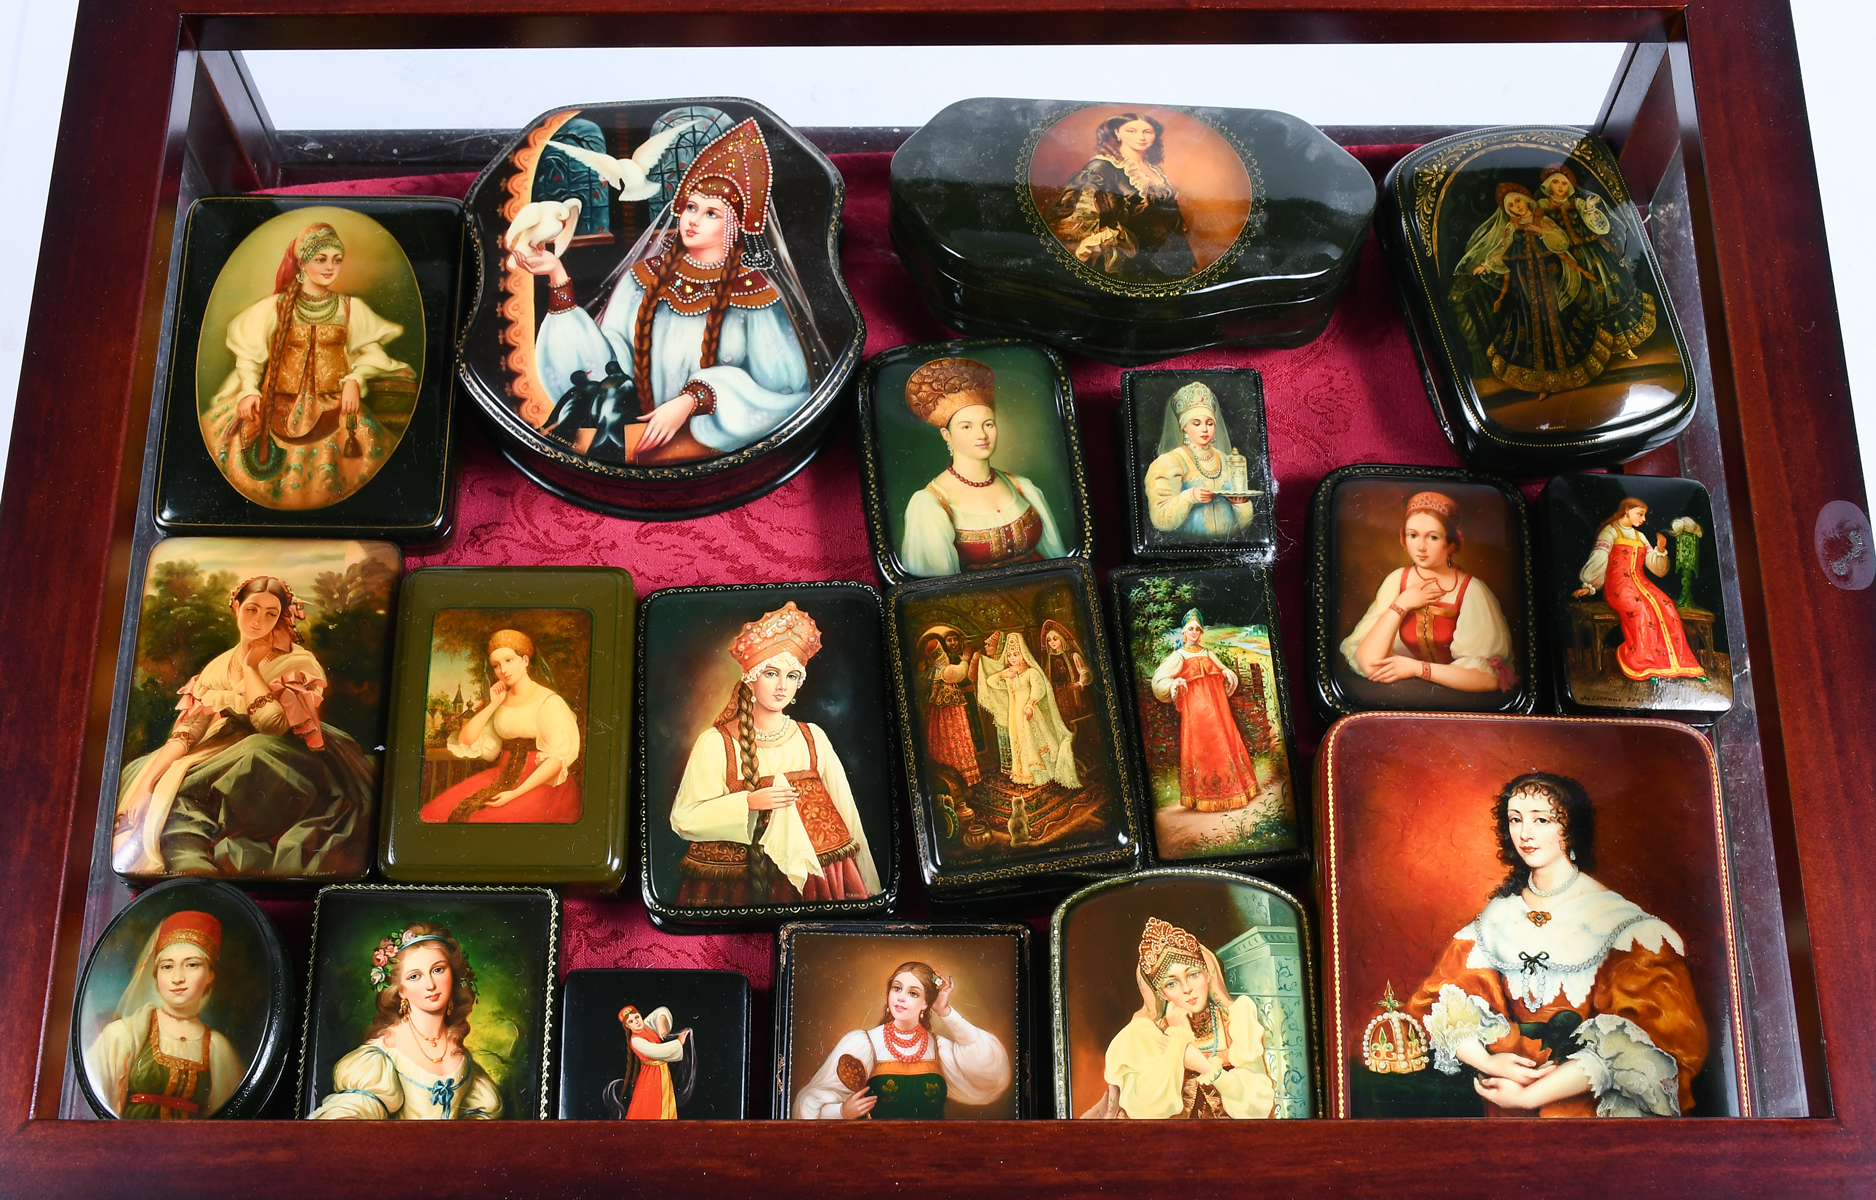 19PC. HAND-PAINTED RUSSIAN LACQUER